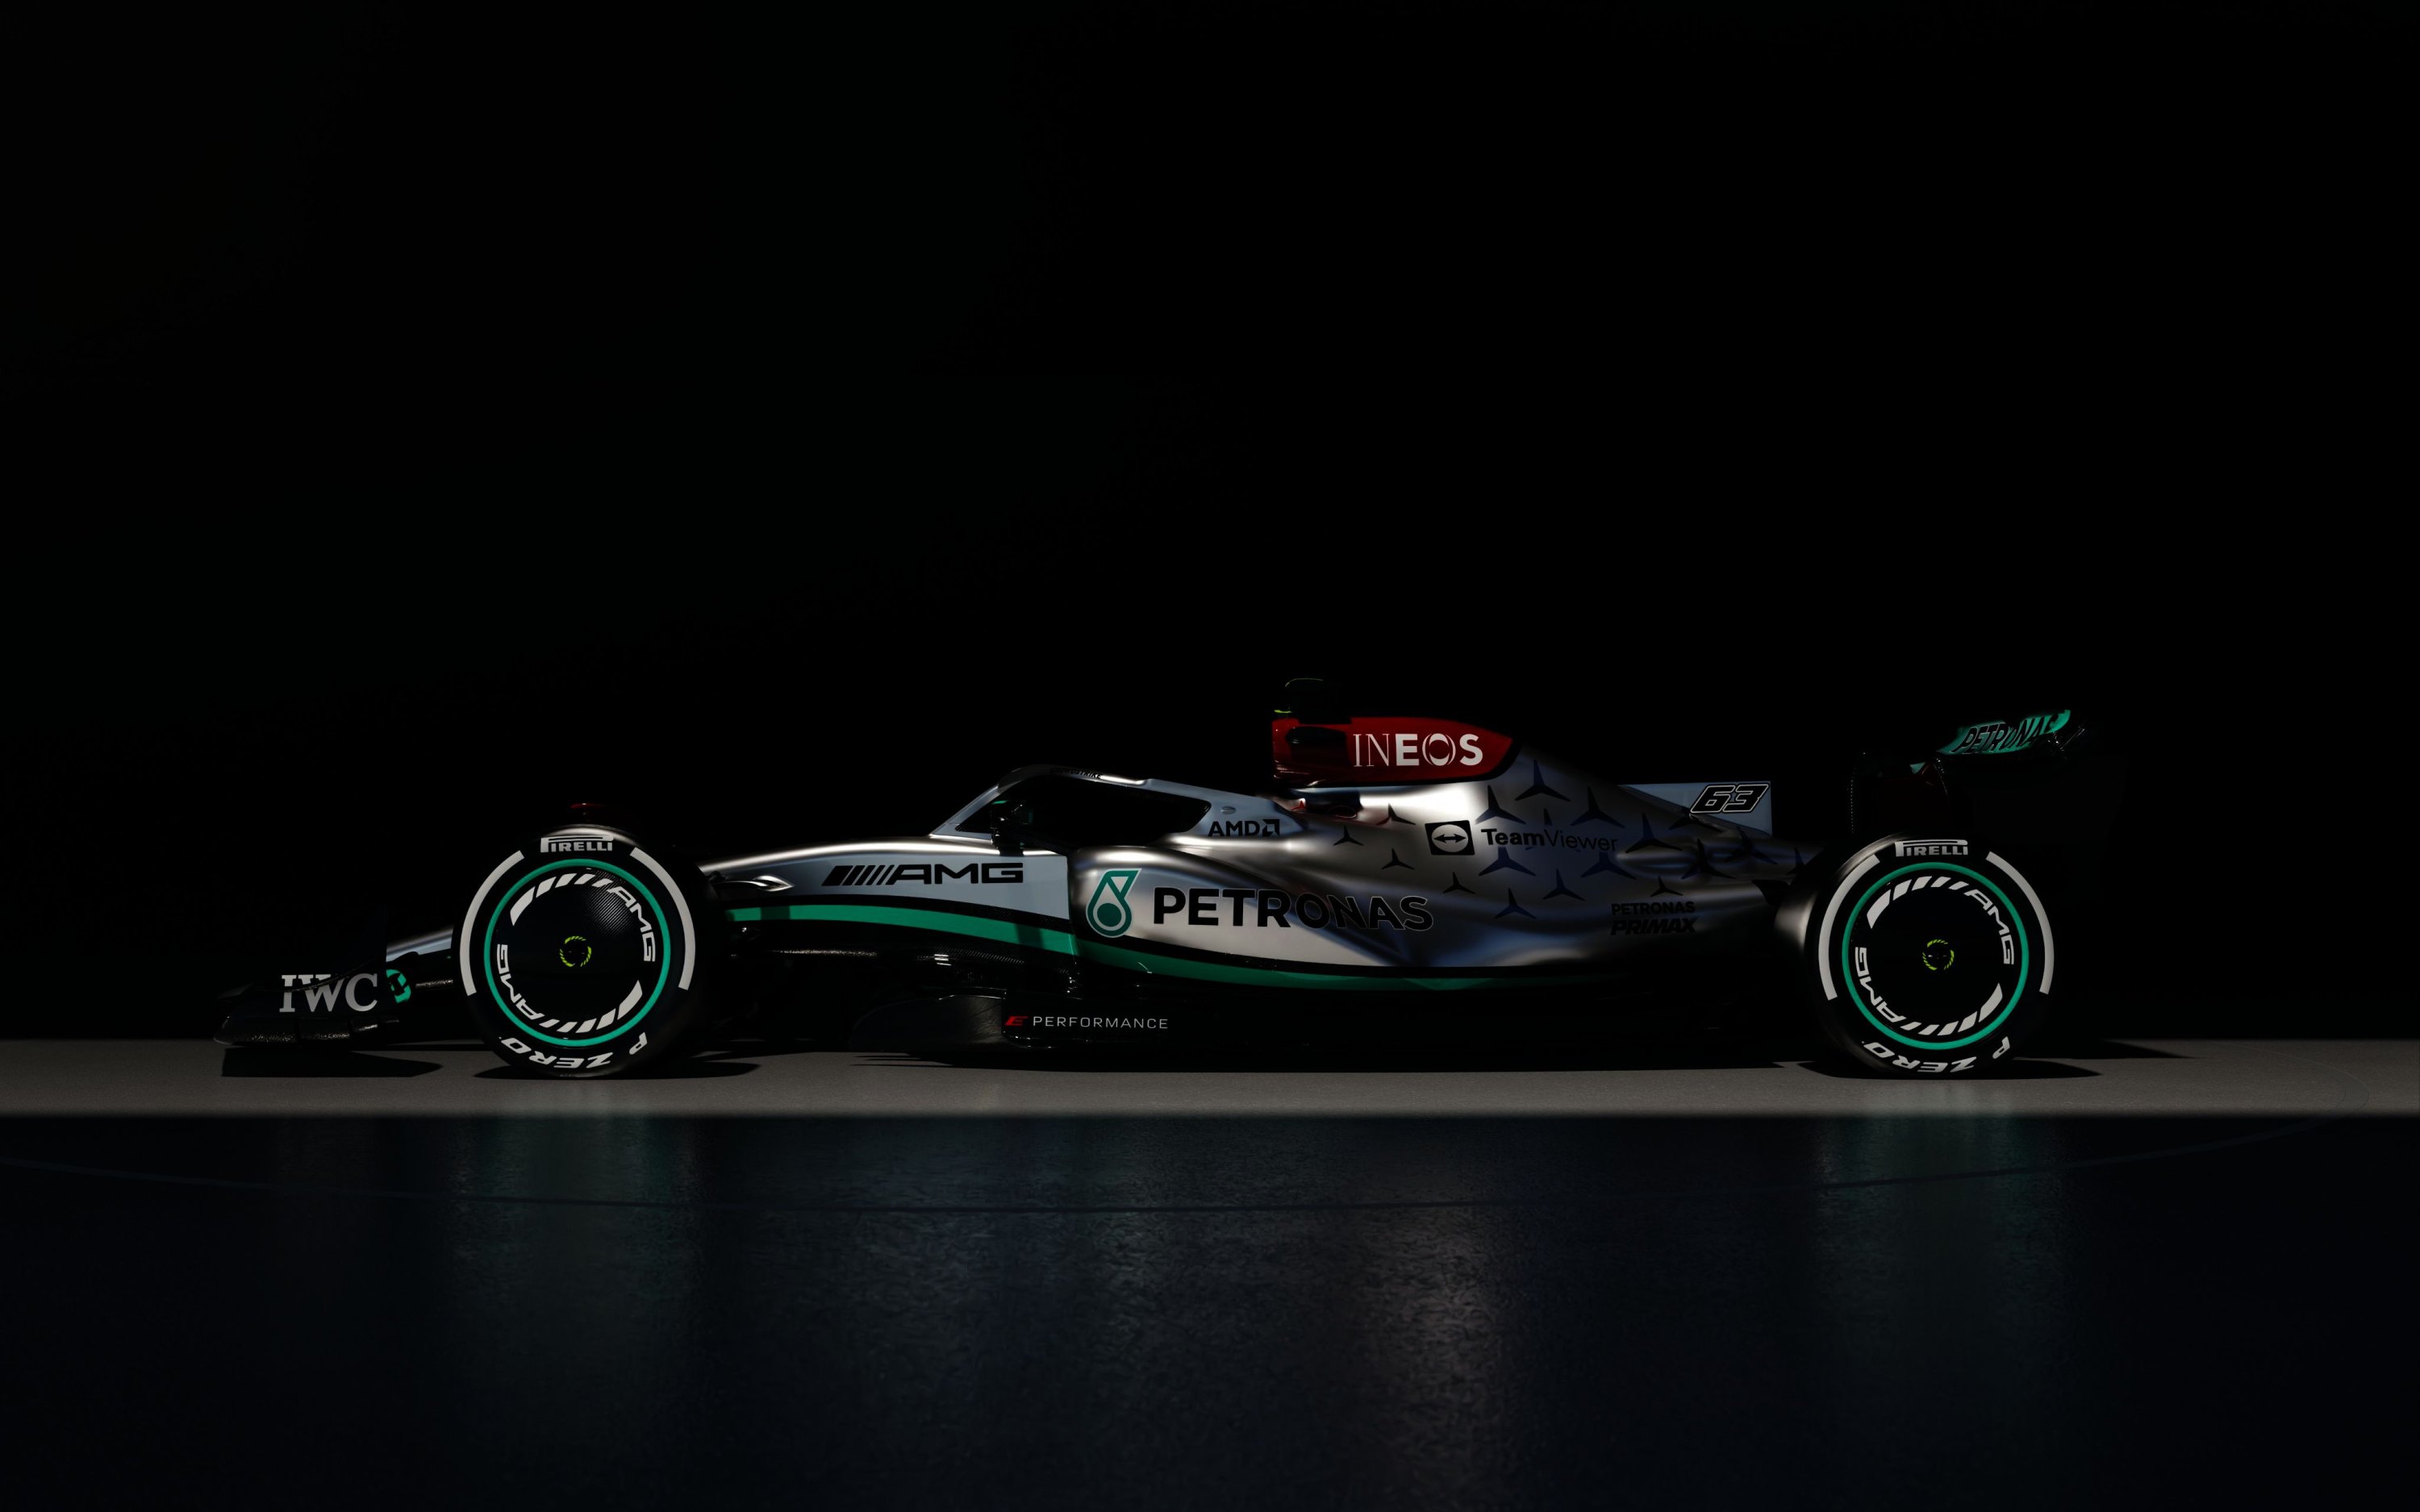 Mercedes' new car for the upcoming 2022 Formula One season, London, England, Feb. 18, 2022. (Mercedes F1 on Twitter)